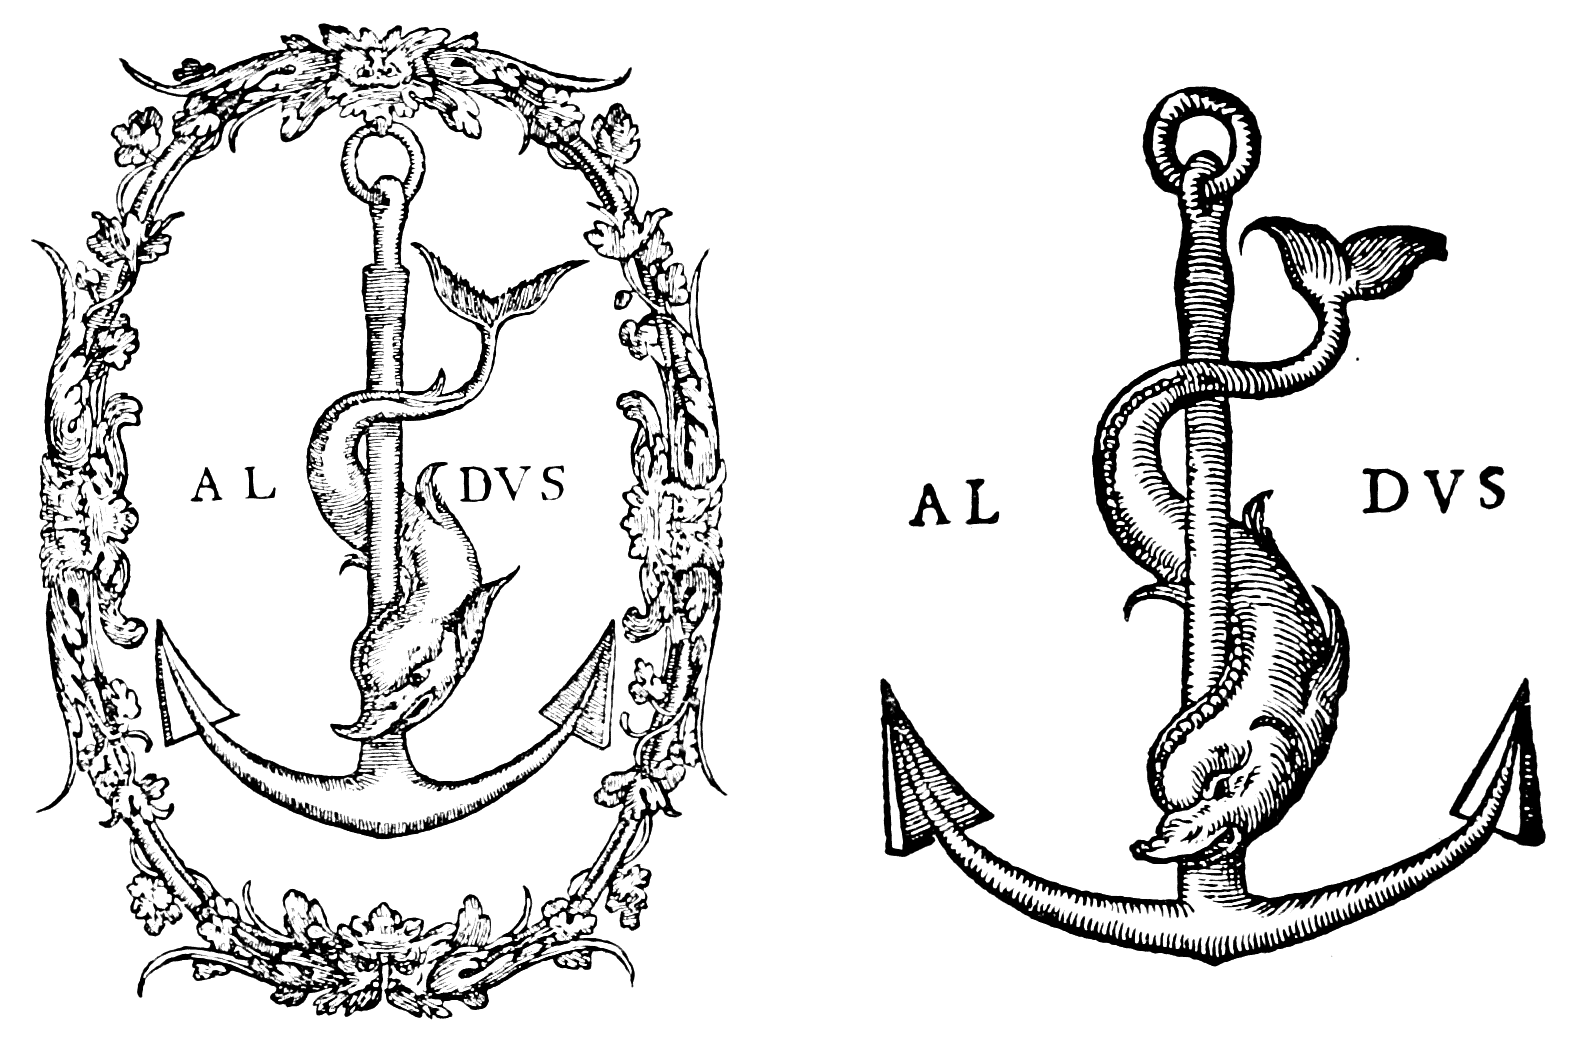 Modification of the third Anchor, 1555-1574.